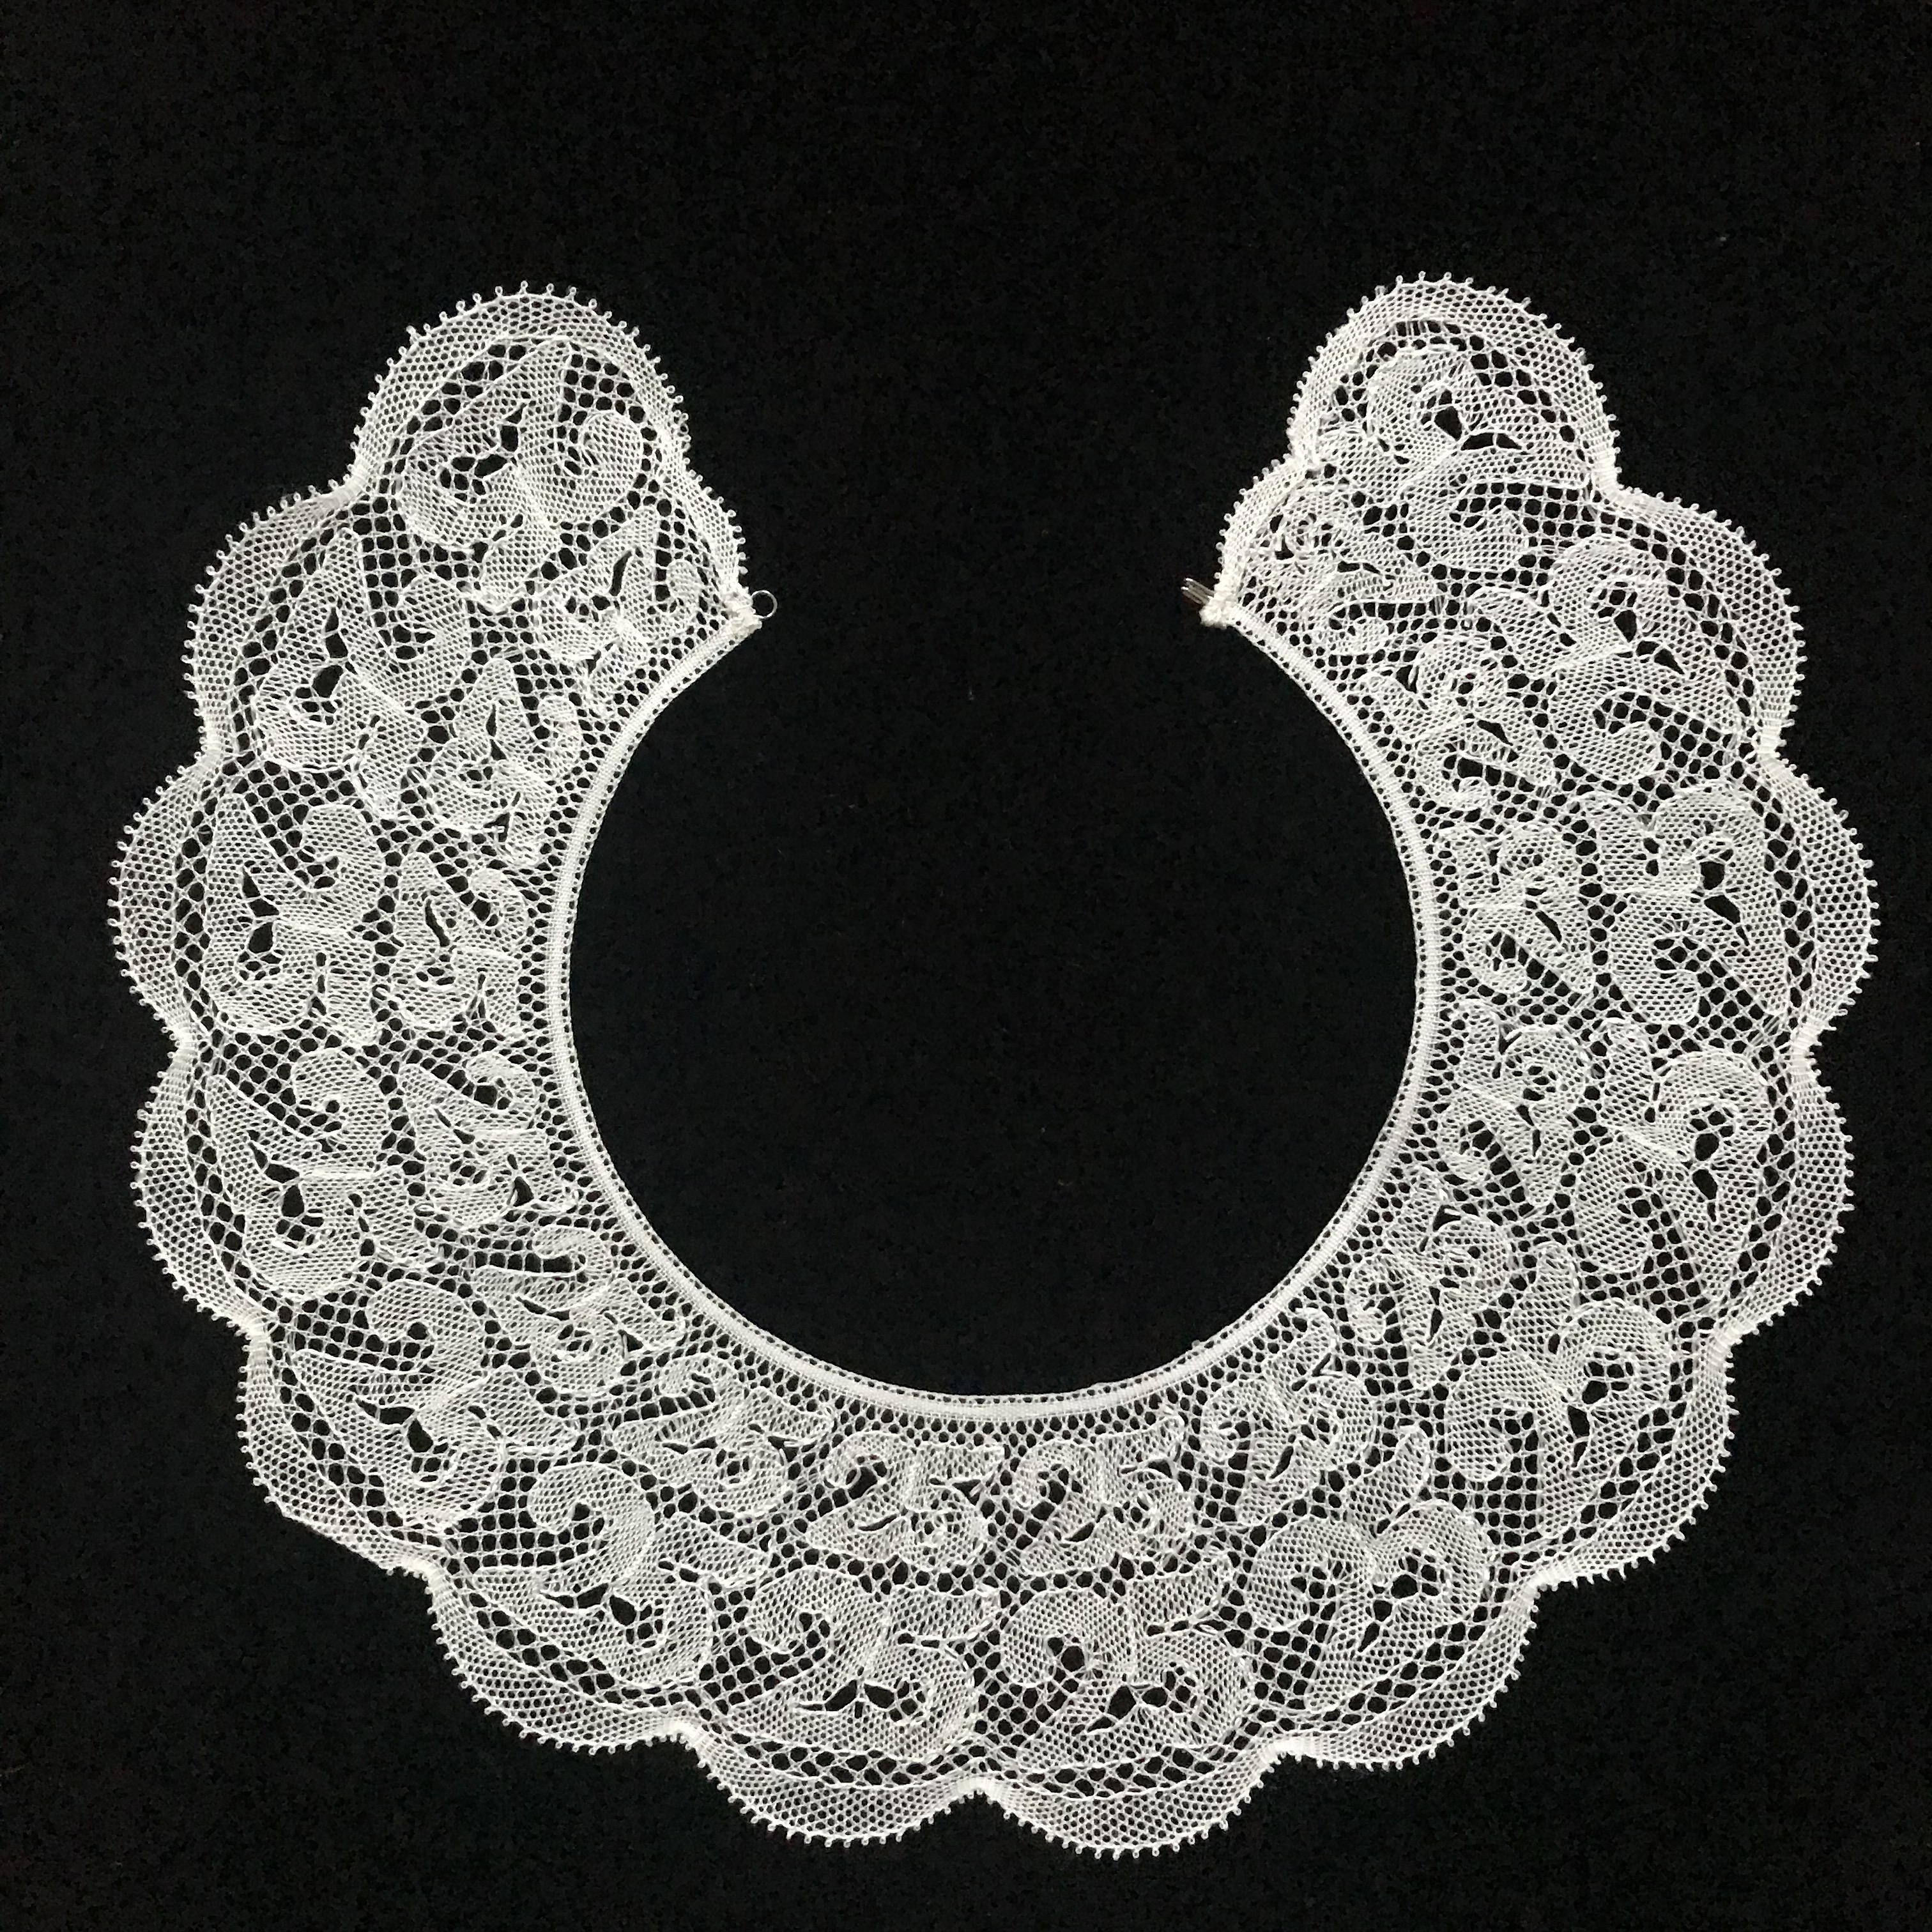 A collar for Ruth Bader Ginsberg made by Kanagy-Loux, commissioned by Columbia Law School in 2018 to mark the 25th anniversary of the late justice’s investiture